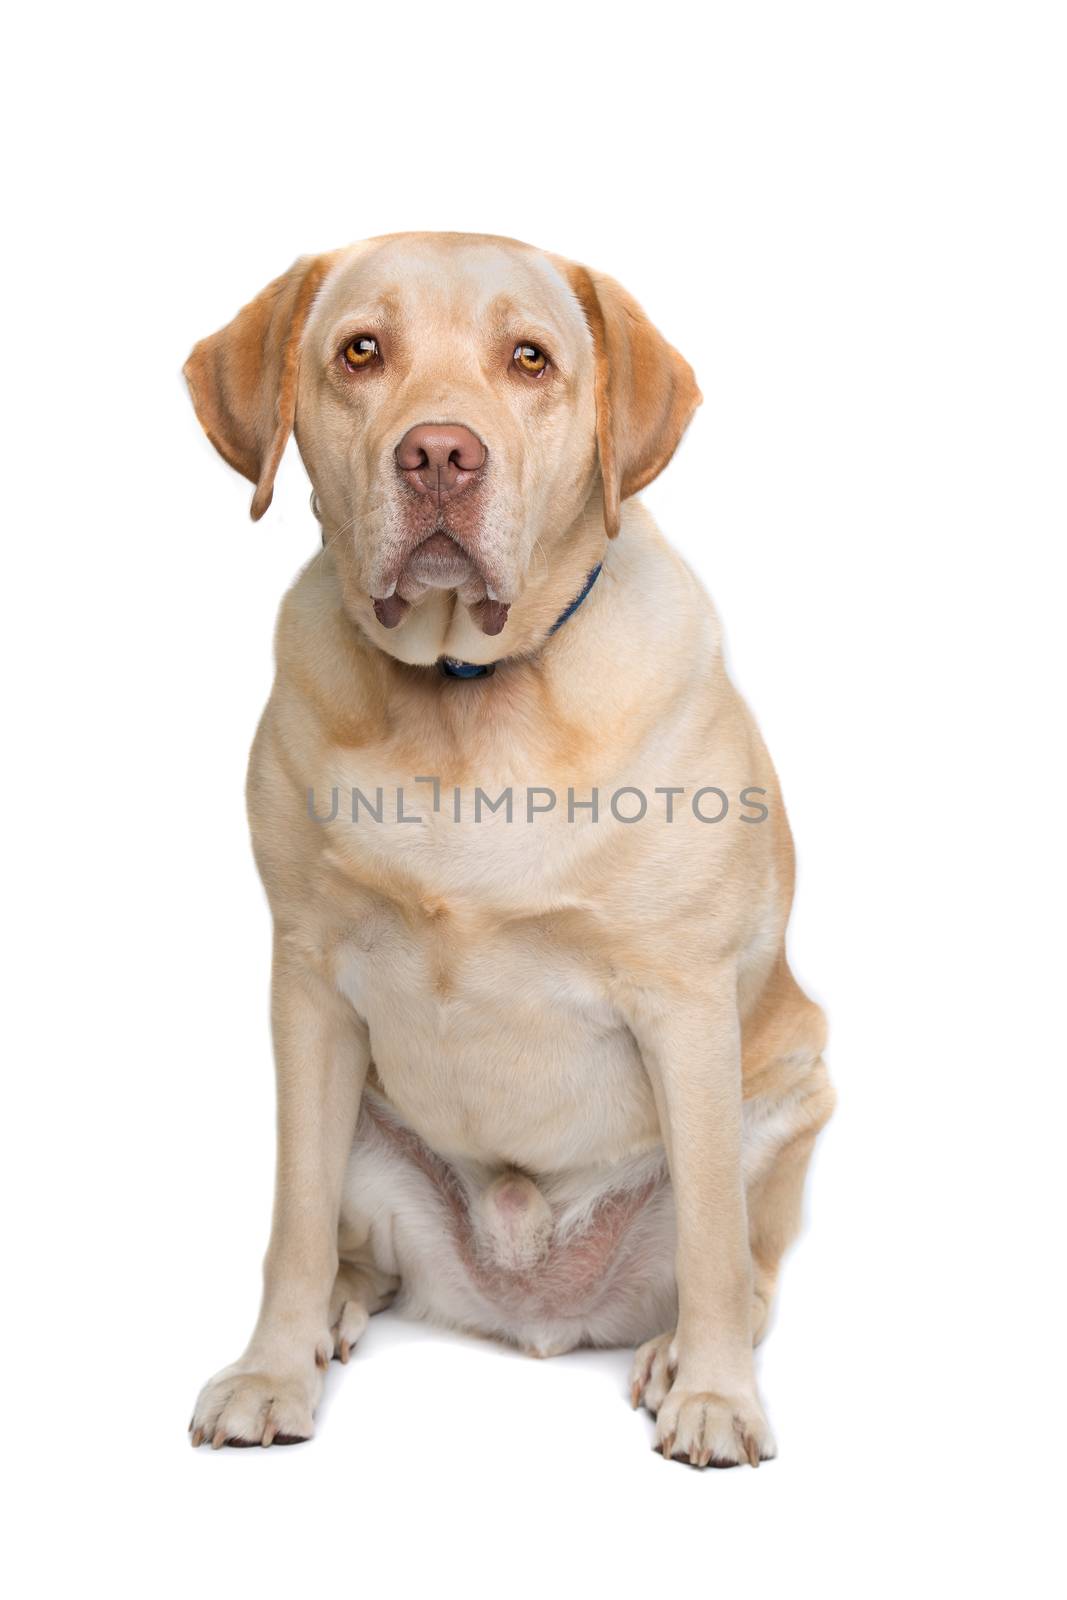 Labrador sitting in front of a white background